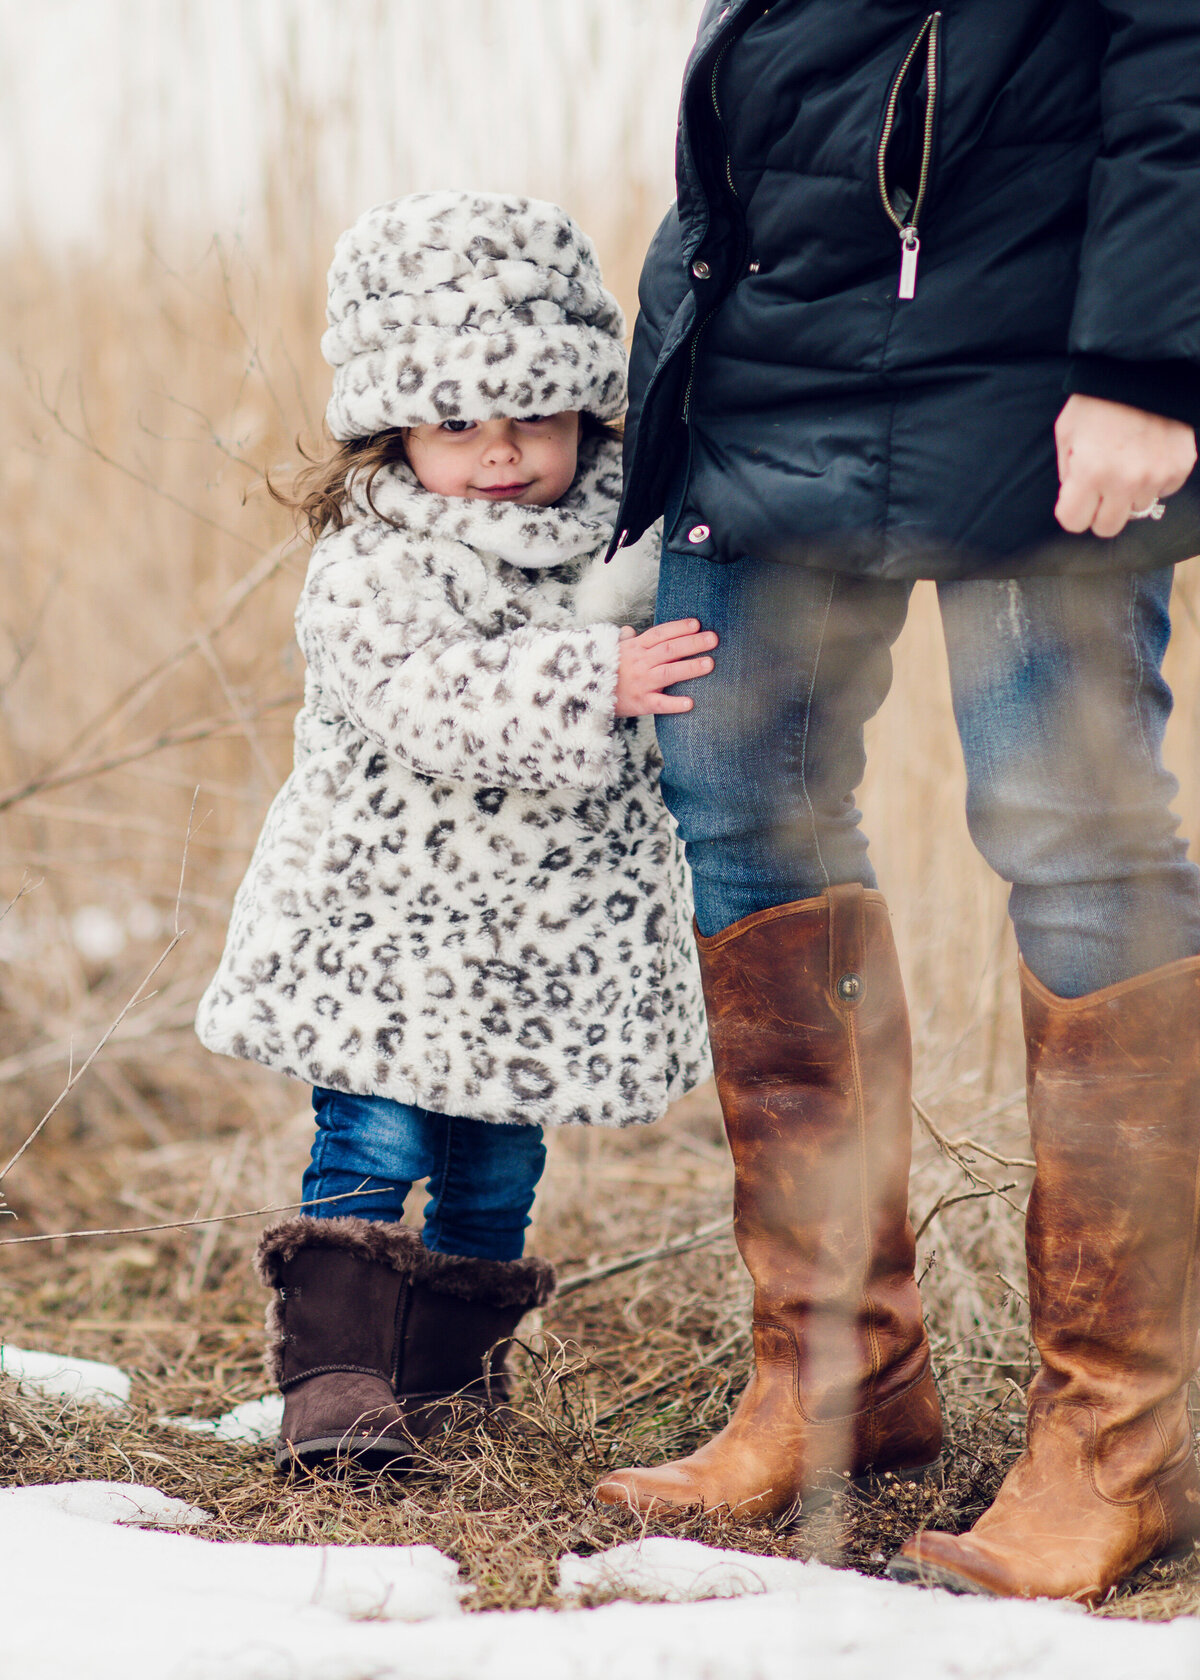 Des-Moines-Iowa-Family-Photographer-Theresa-Schumacher-Winter-Mom-Daughter-Boots